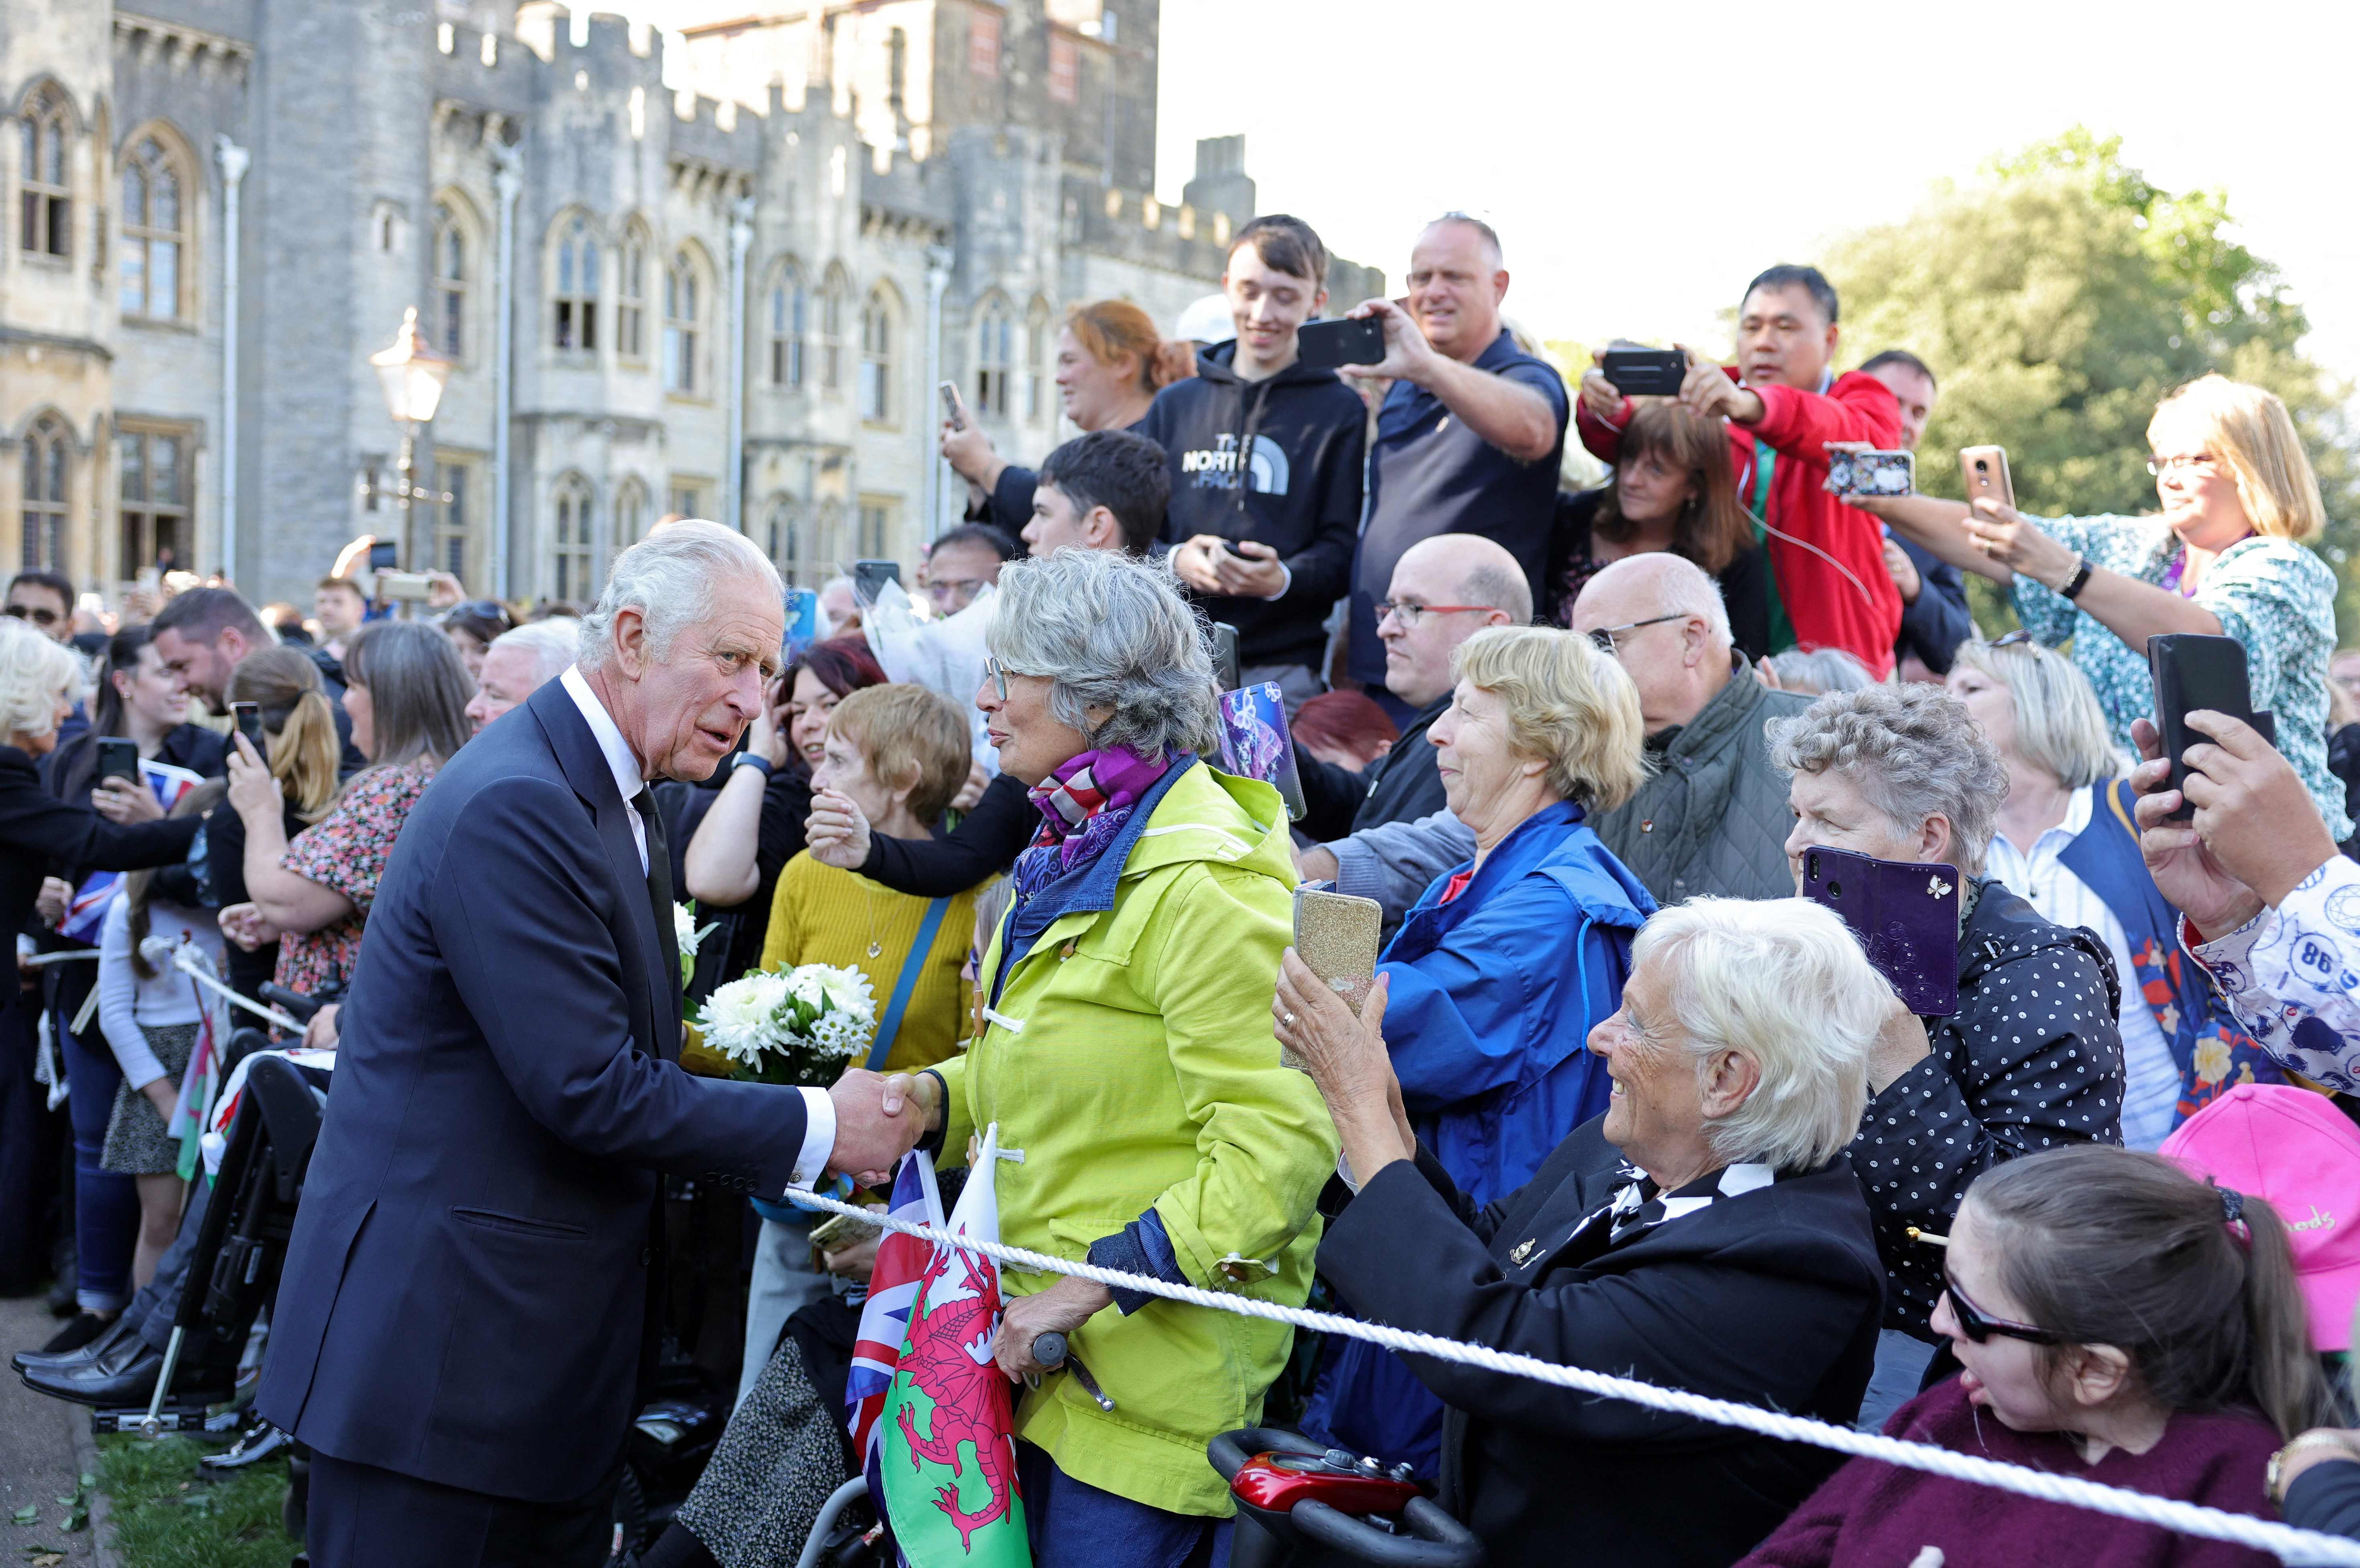 King Charles III greets the public during a visit at Cardiff Castle